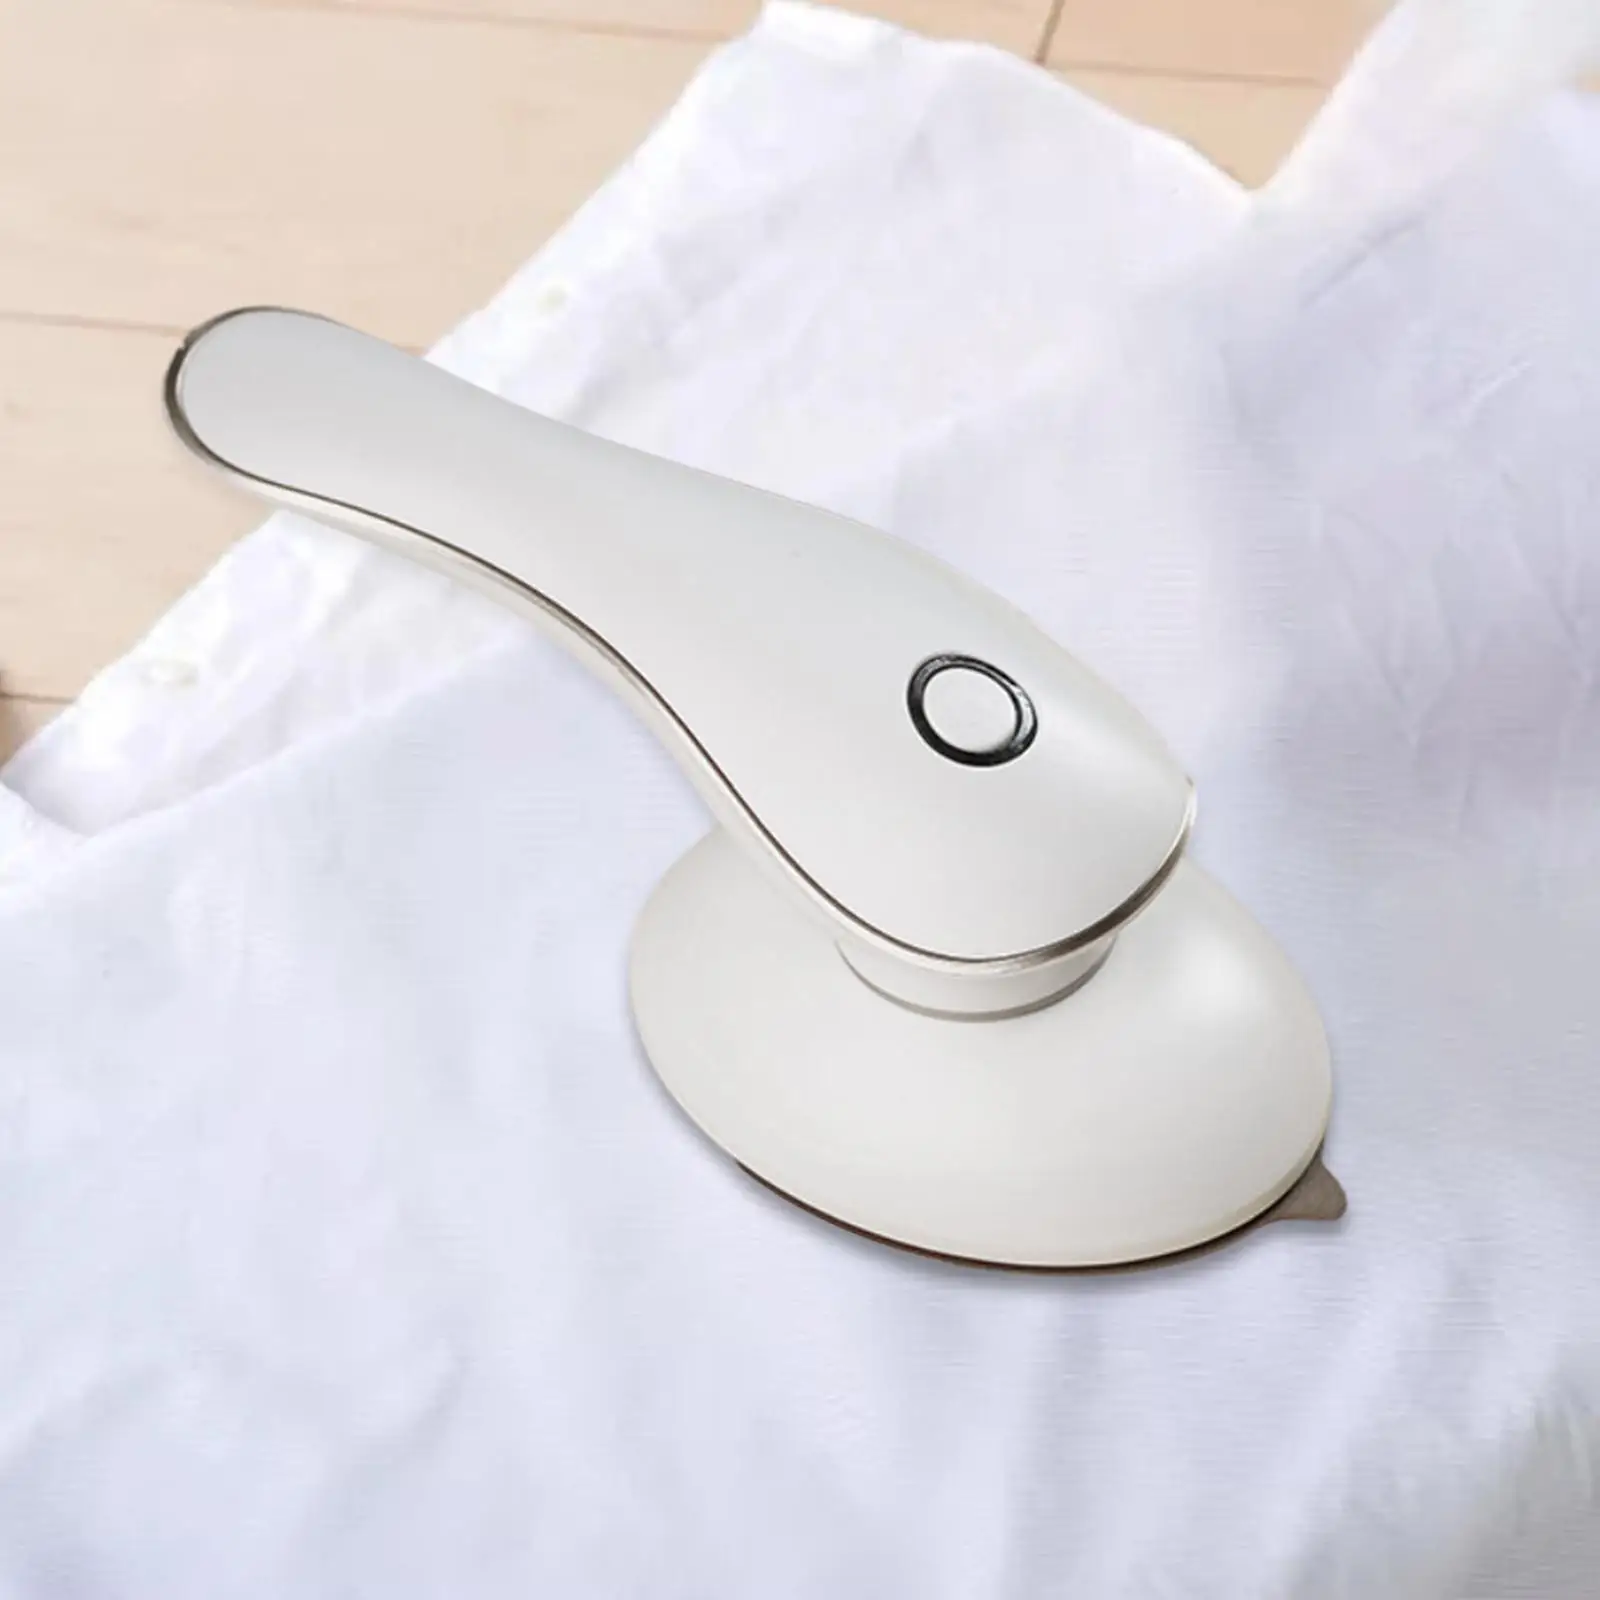 Handheld Steamer Cleaner Travel Steamer Dry and Wet Use Universal Garment Steamer Portable for Home Indoor Business Dating